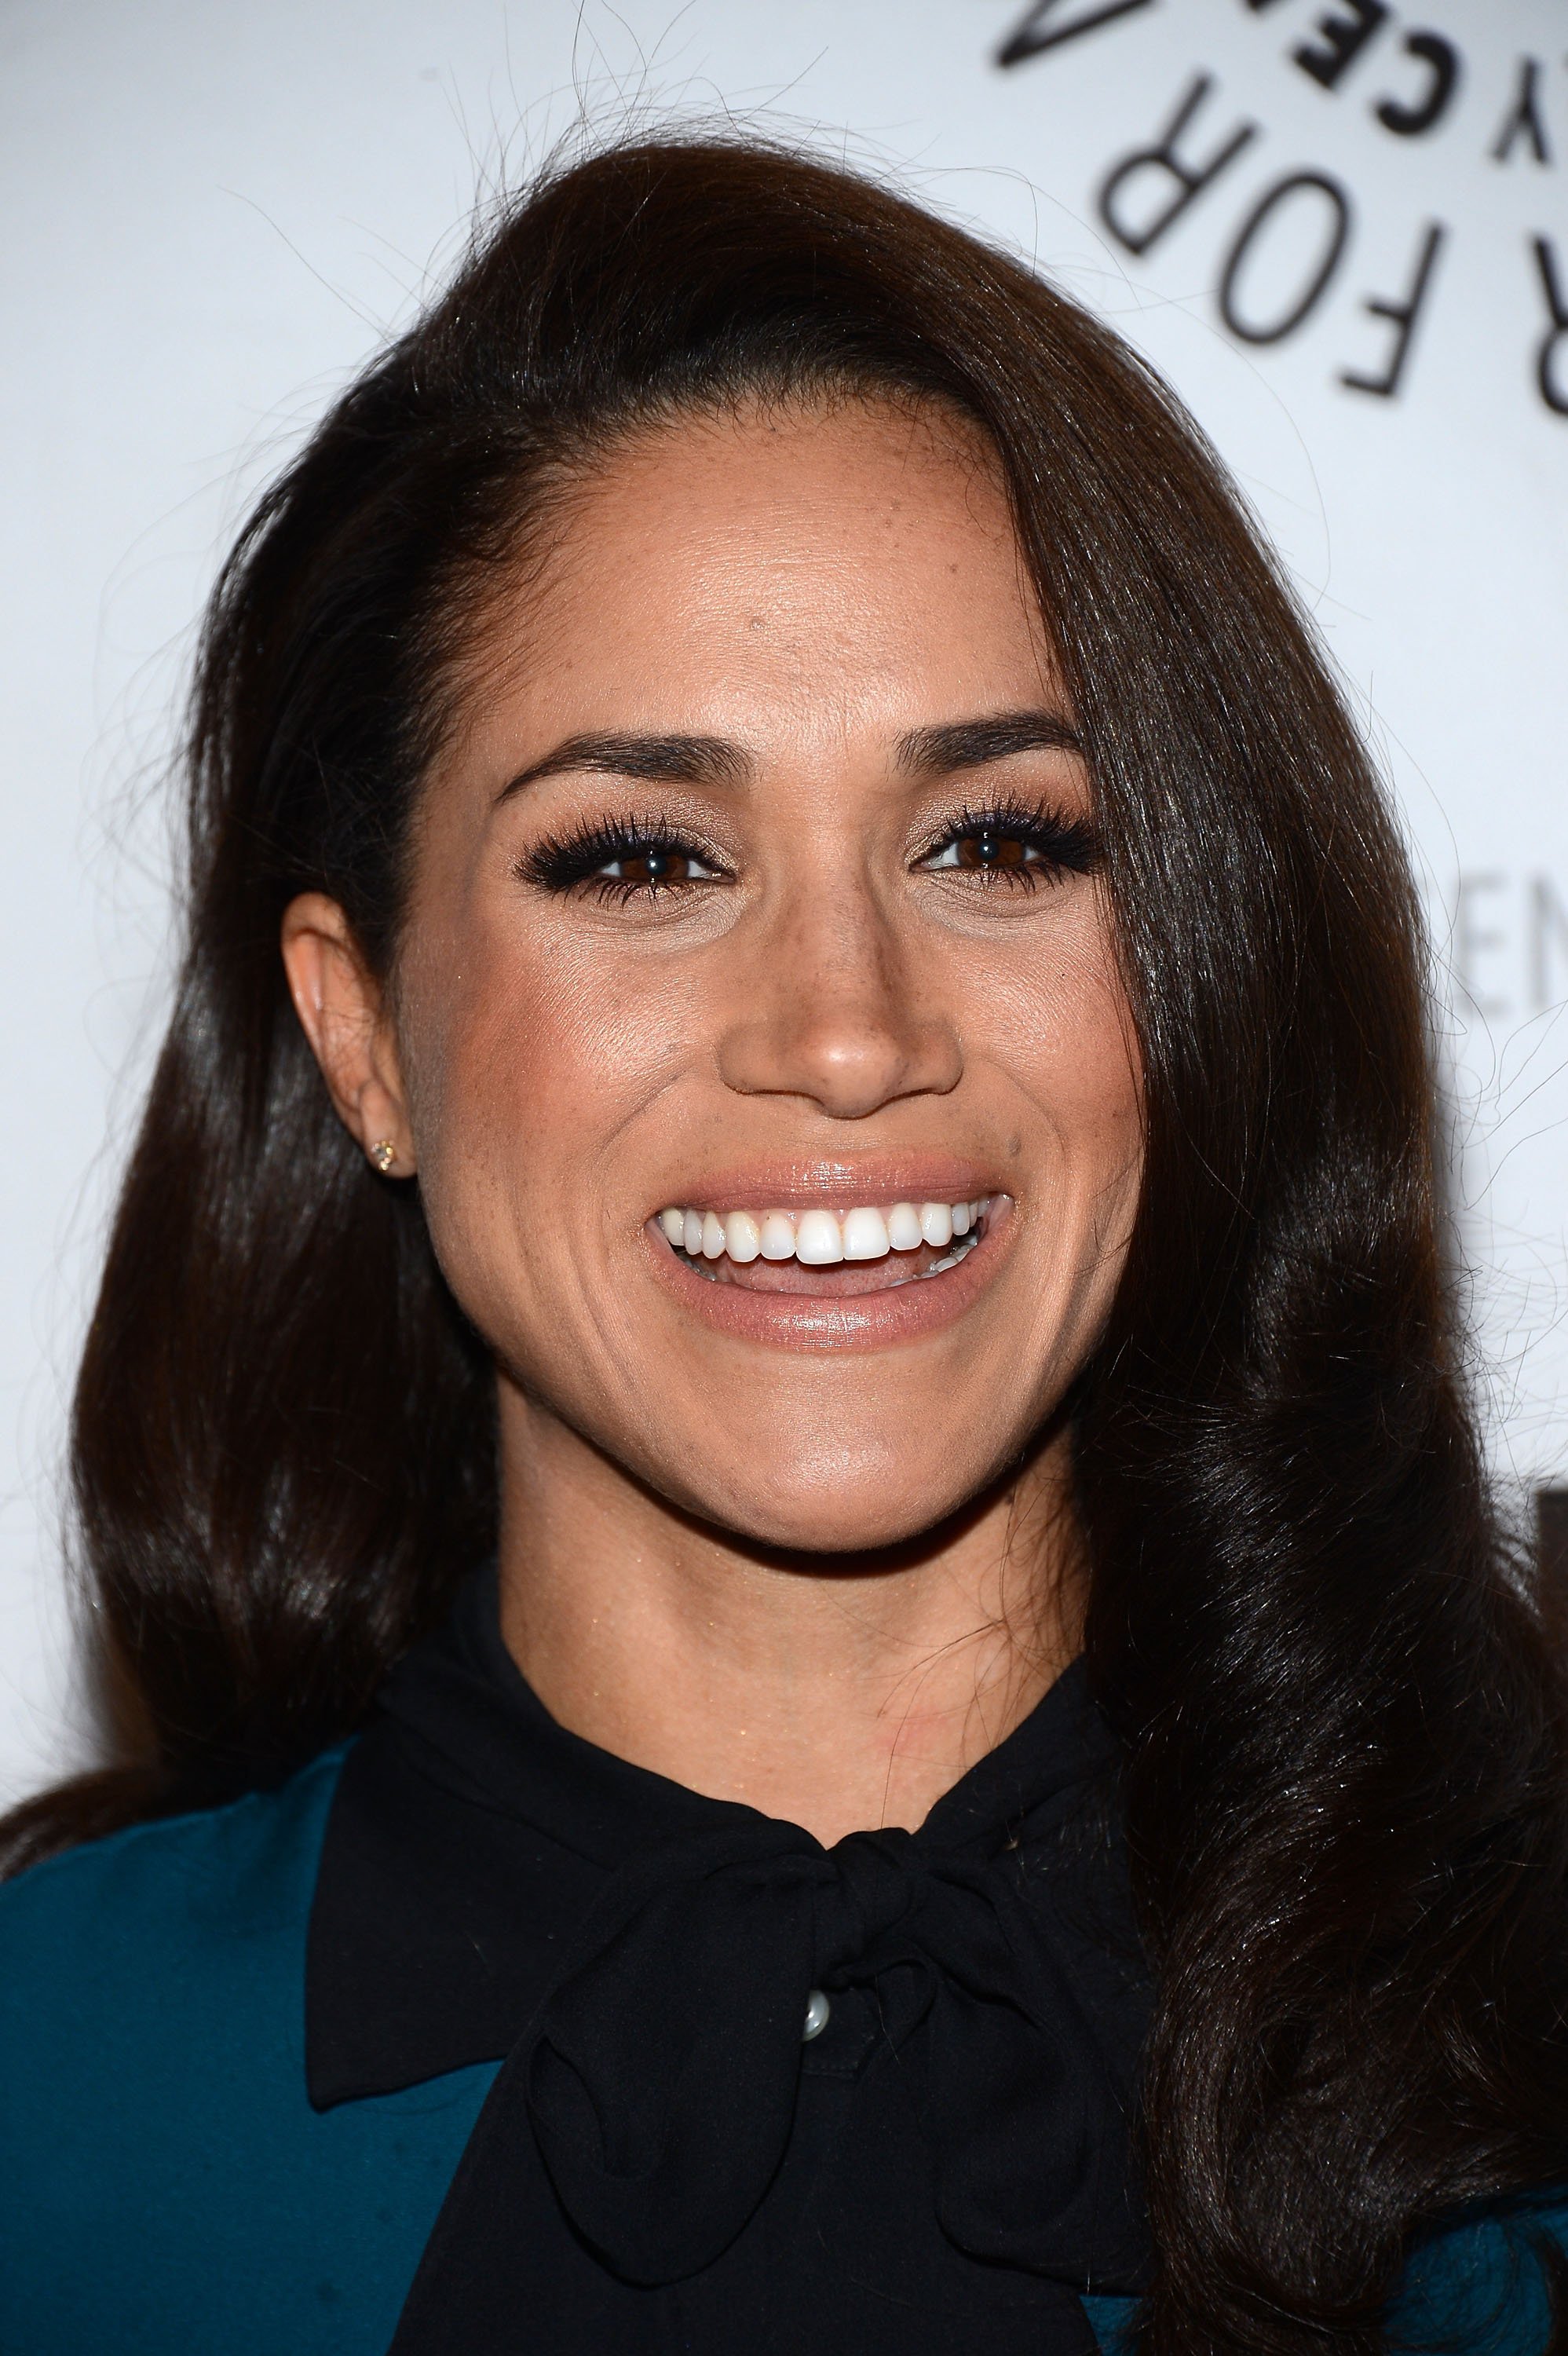 Meghan Markle at The Paley Center for Media Presents an Evening with "Suits" Mid-Season Premiere Screening and Panel on January 14, 2013, in Beverly Hills, California. | Source: Getty Images